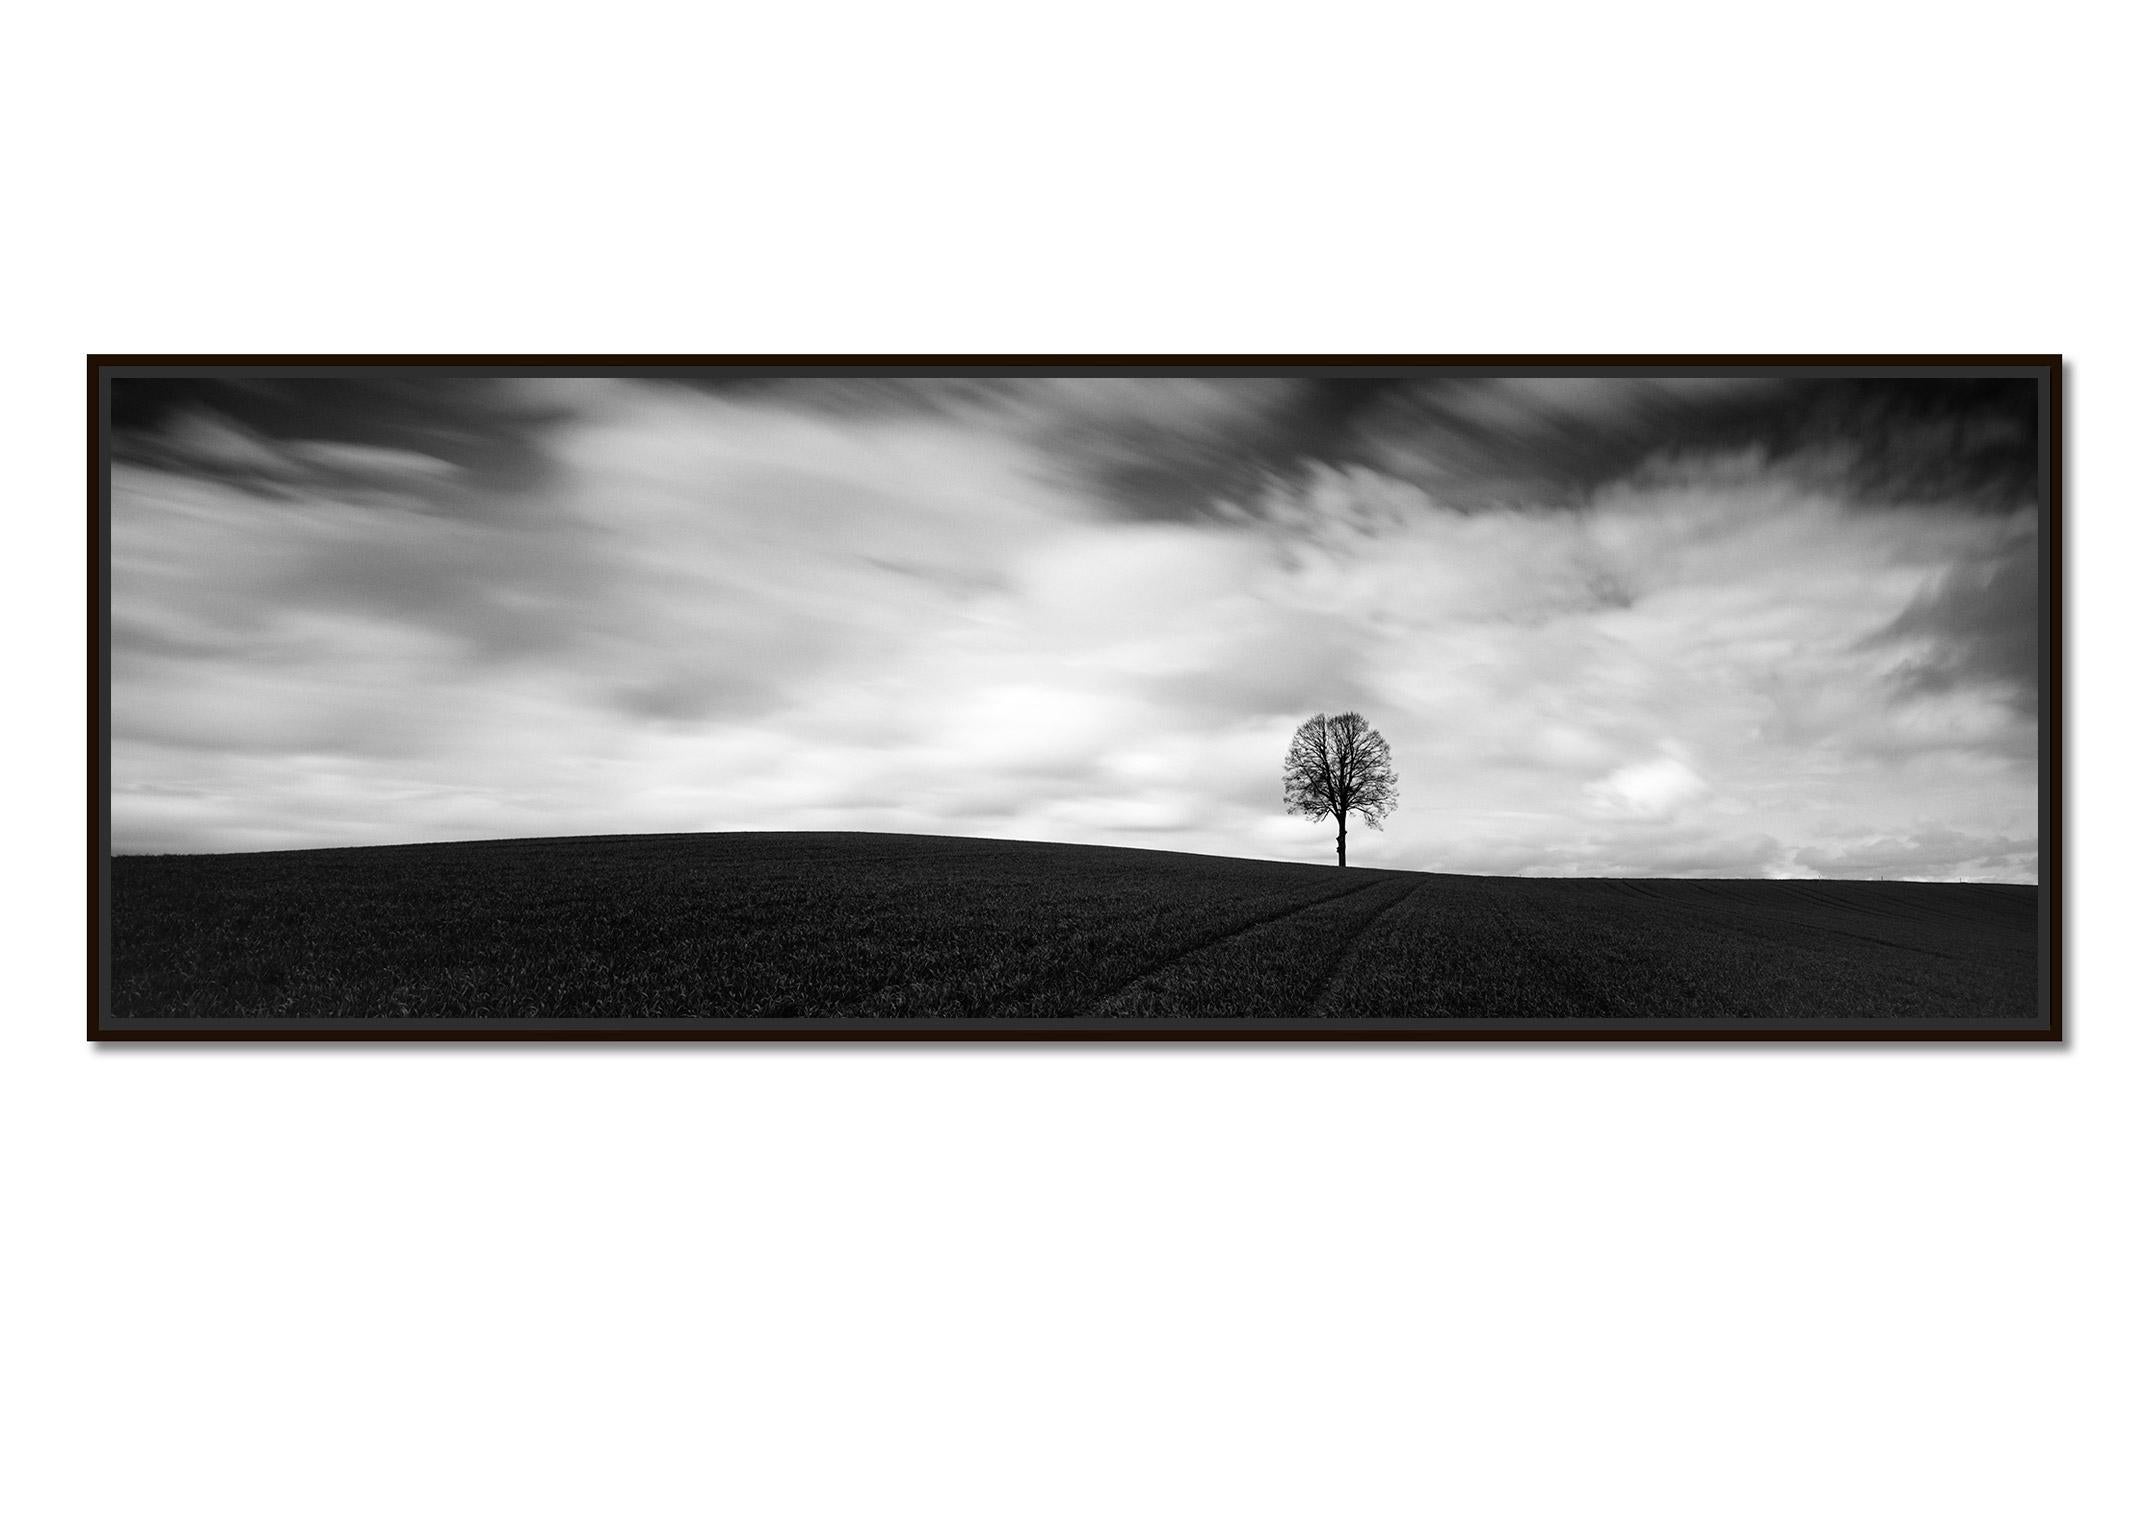 Farmland Panorama, single tree, field, black and white, landscape, photography - Photograph by Gerald Berghammer